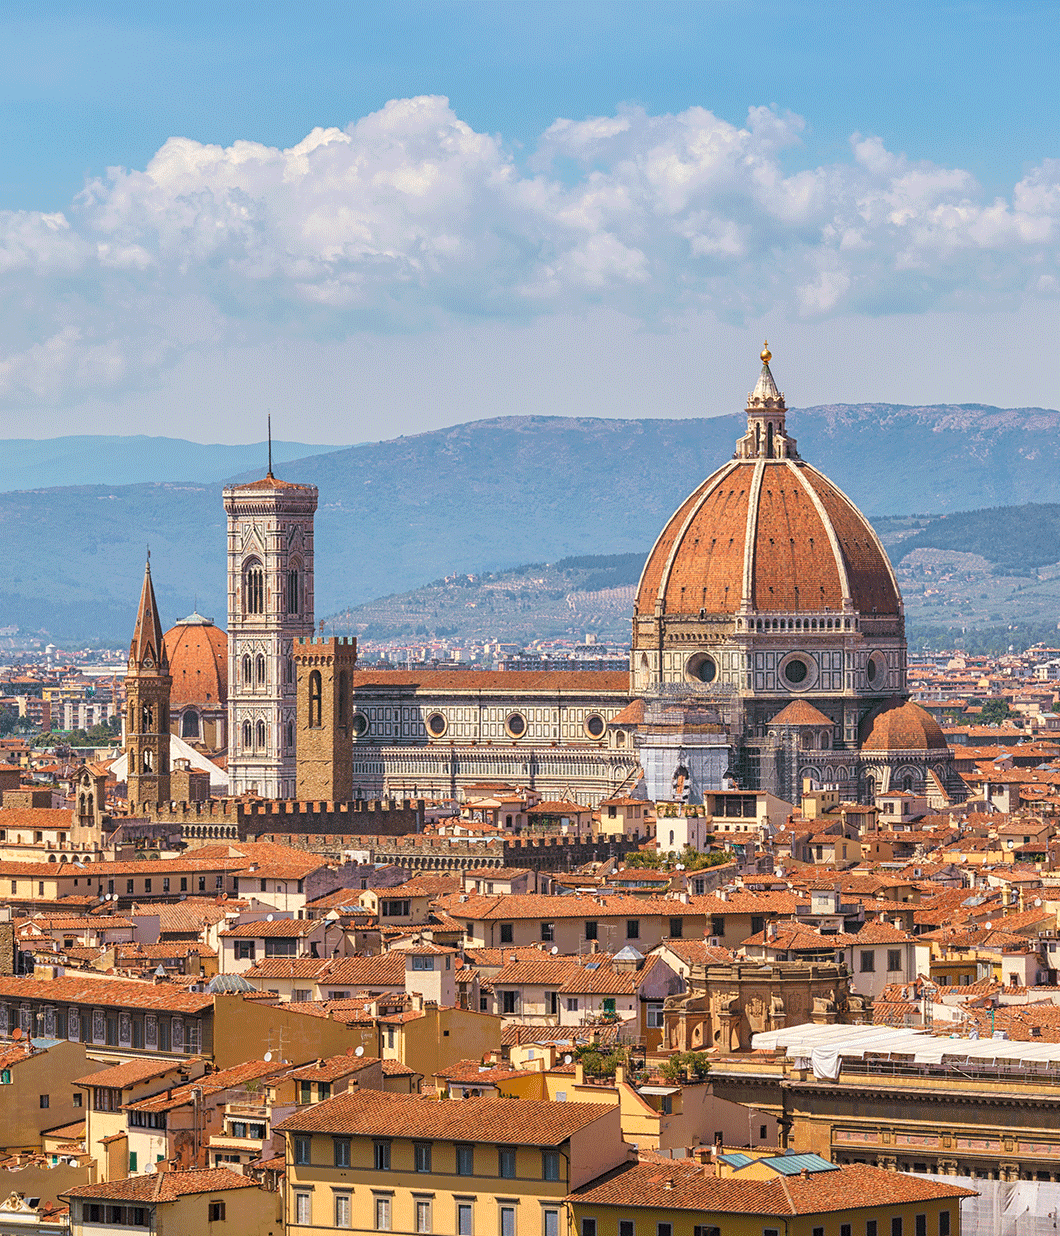 A view of the Duomo in Florence, Italy